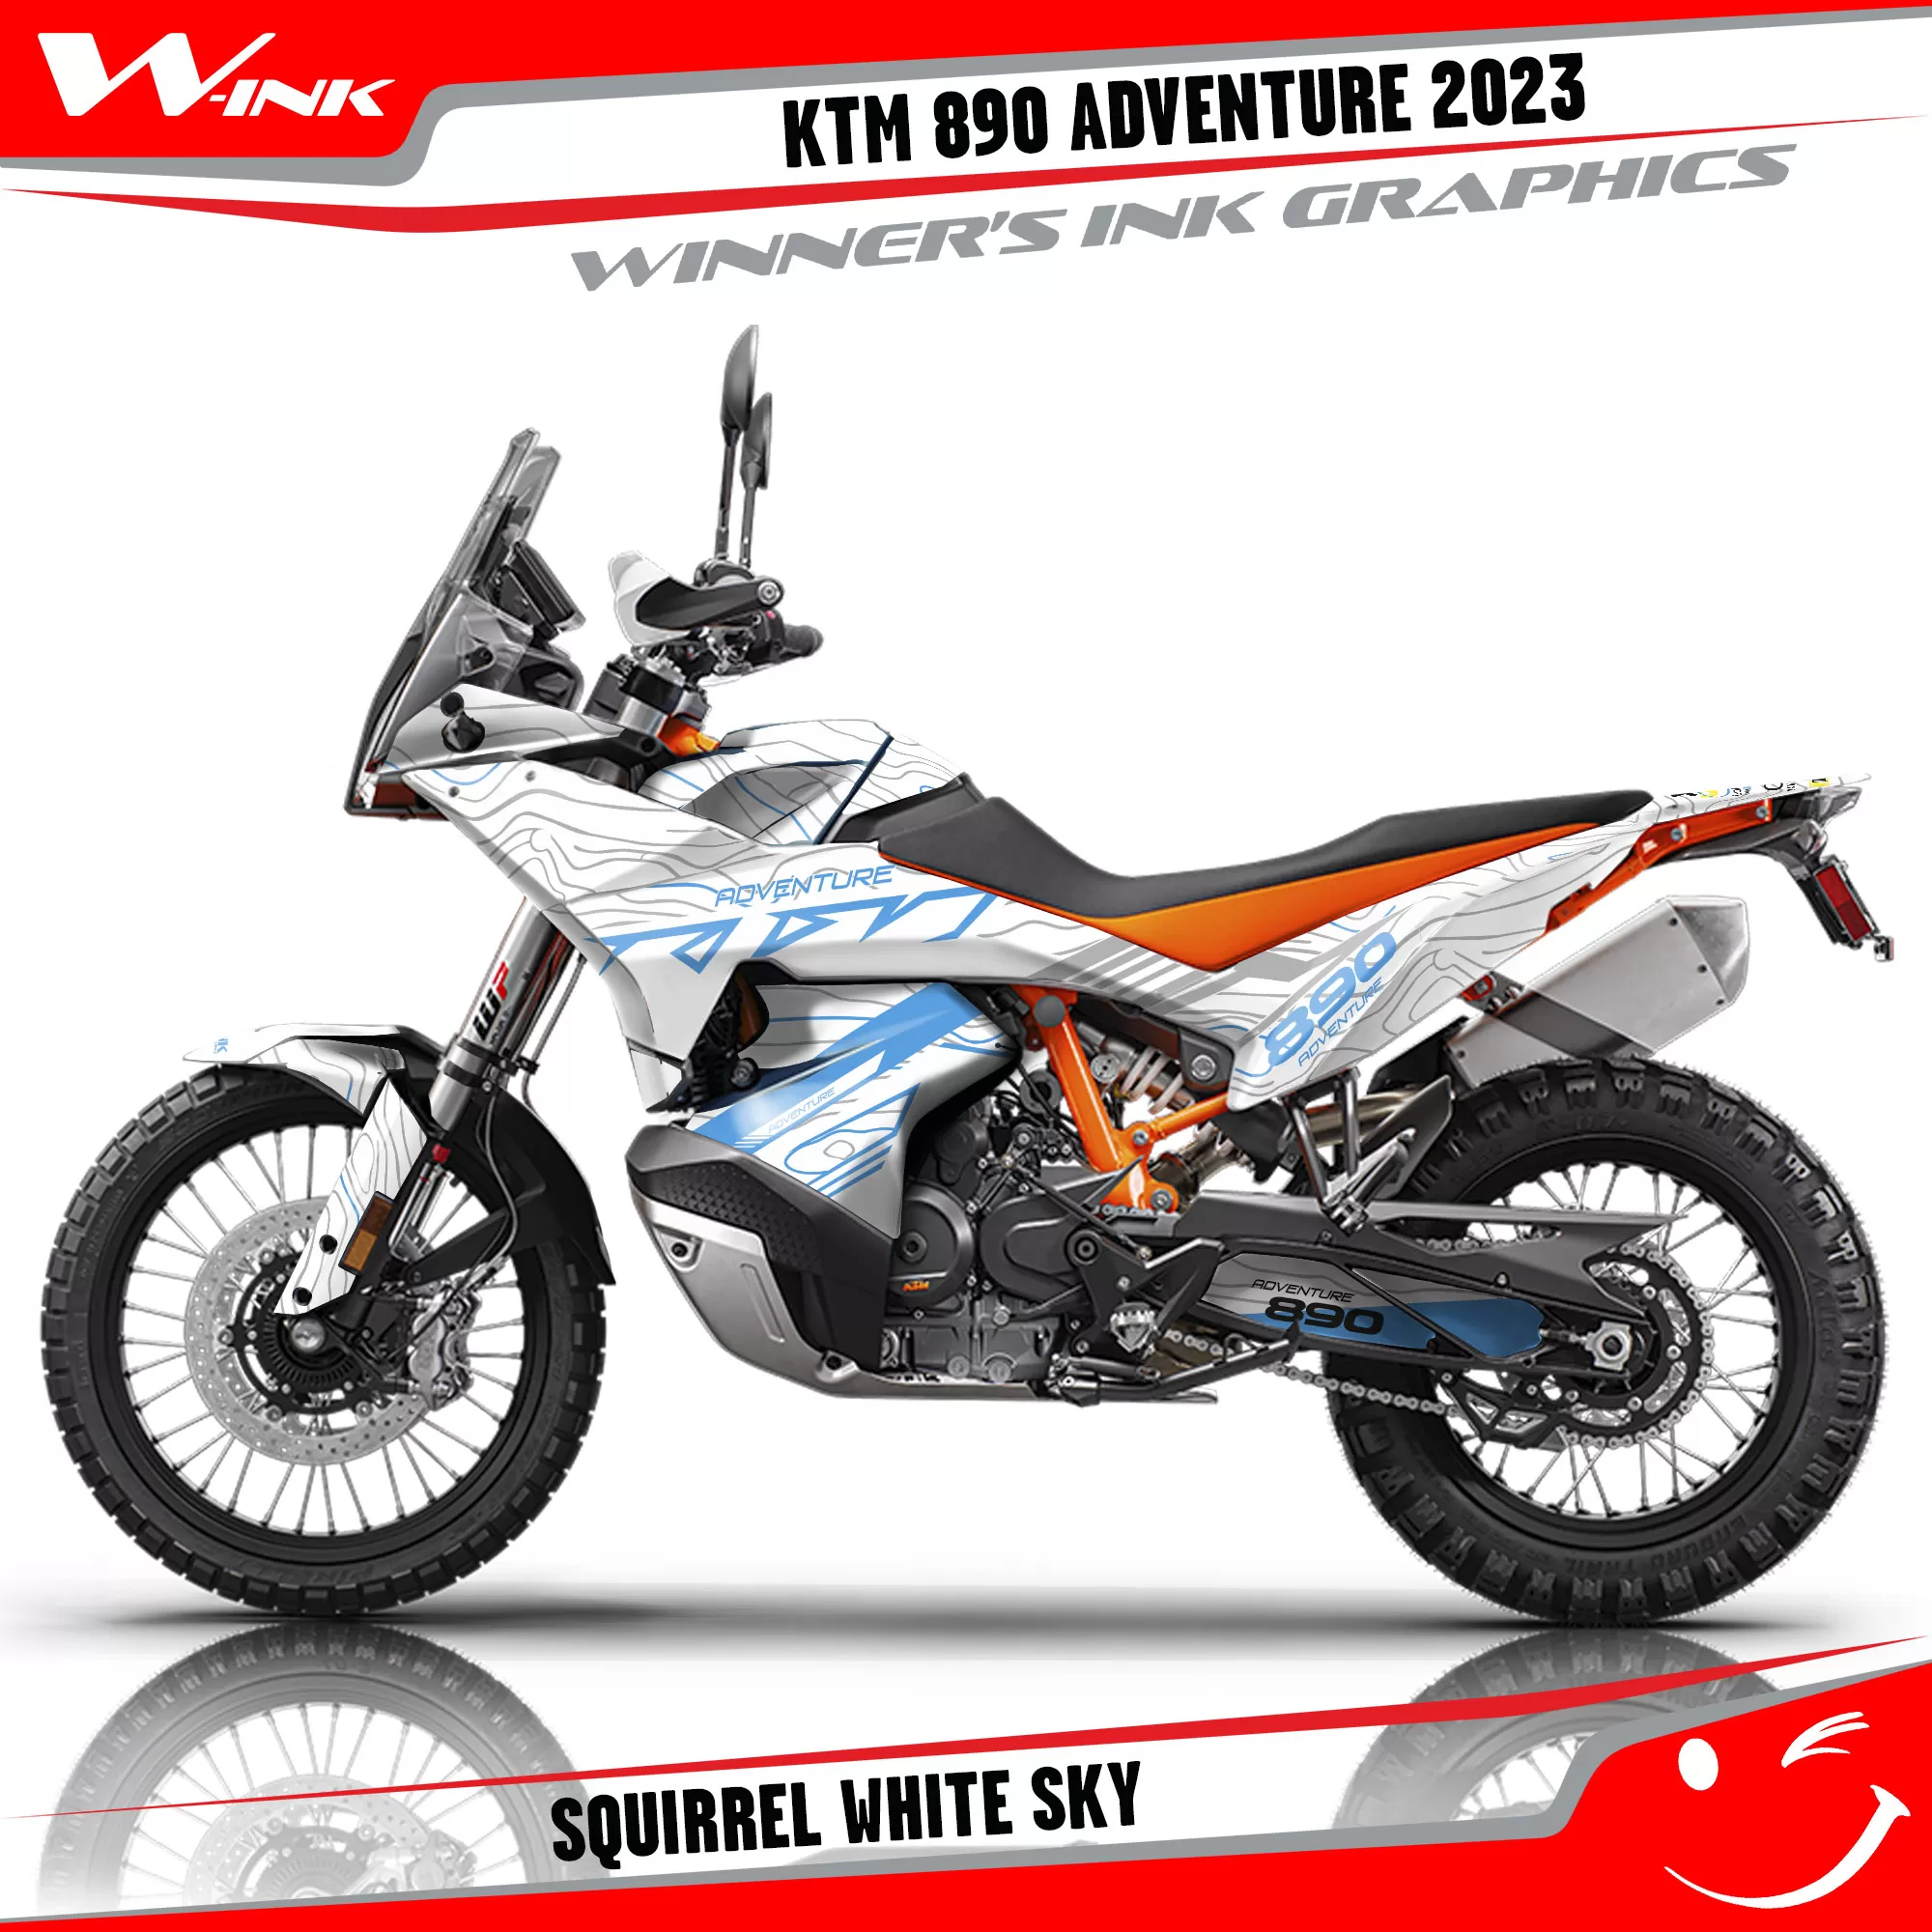 Adventure-890-2023-graphics-kit-and-decals-with-design-Squirrel-White-Sky